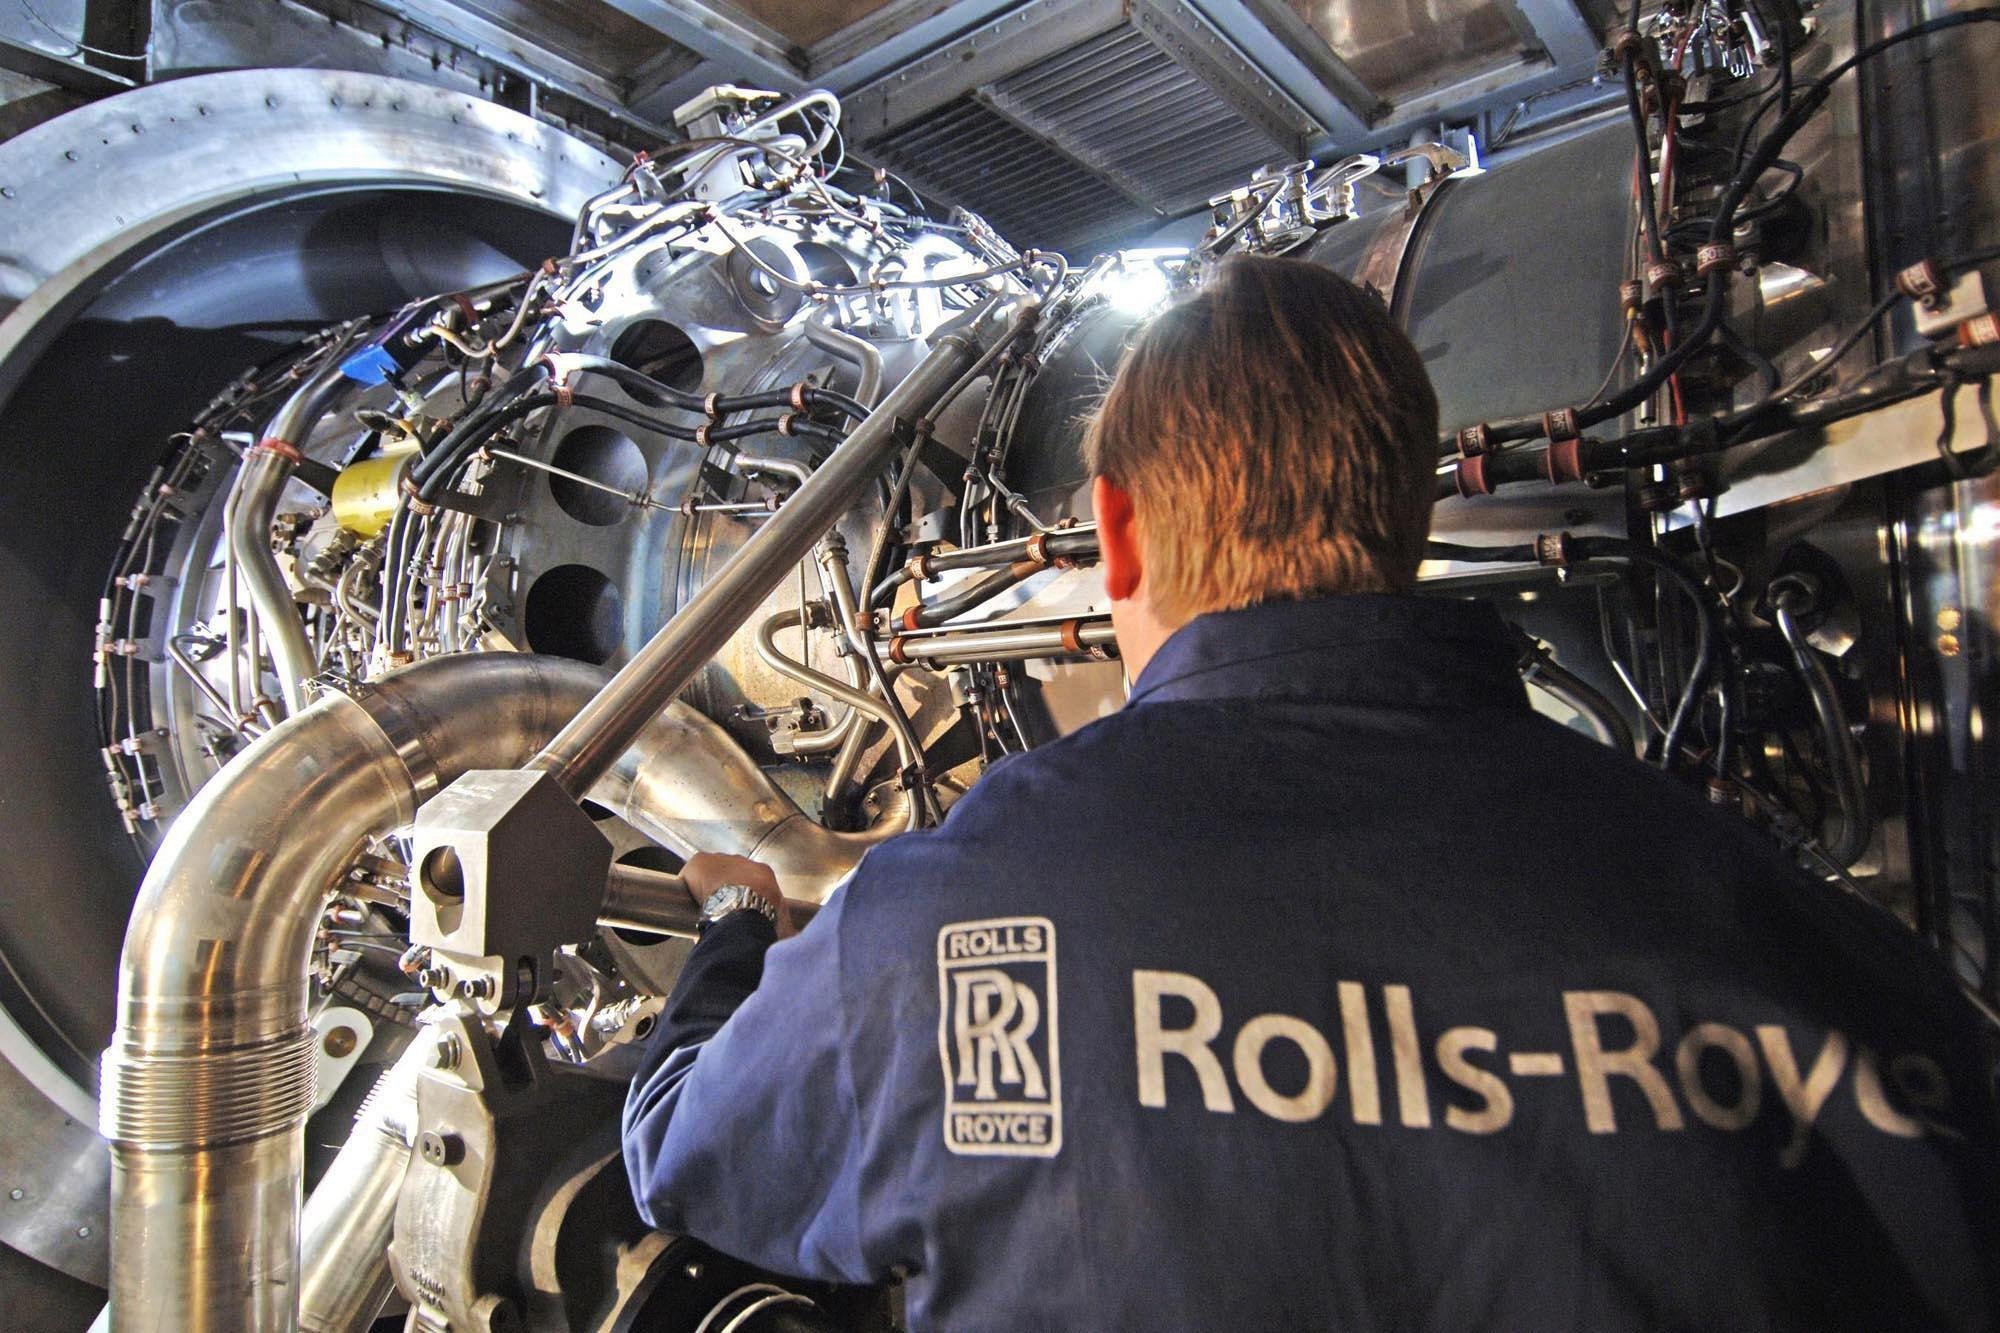 Rolls-Royce has two ‘employee champions’ on its board. Their backgrounds call their suitability for the role into question